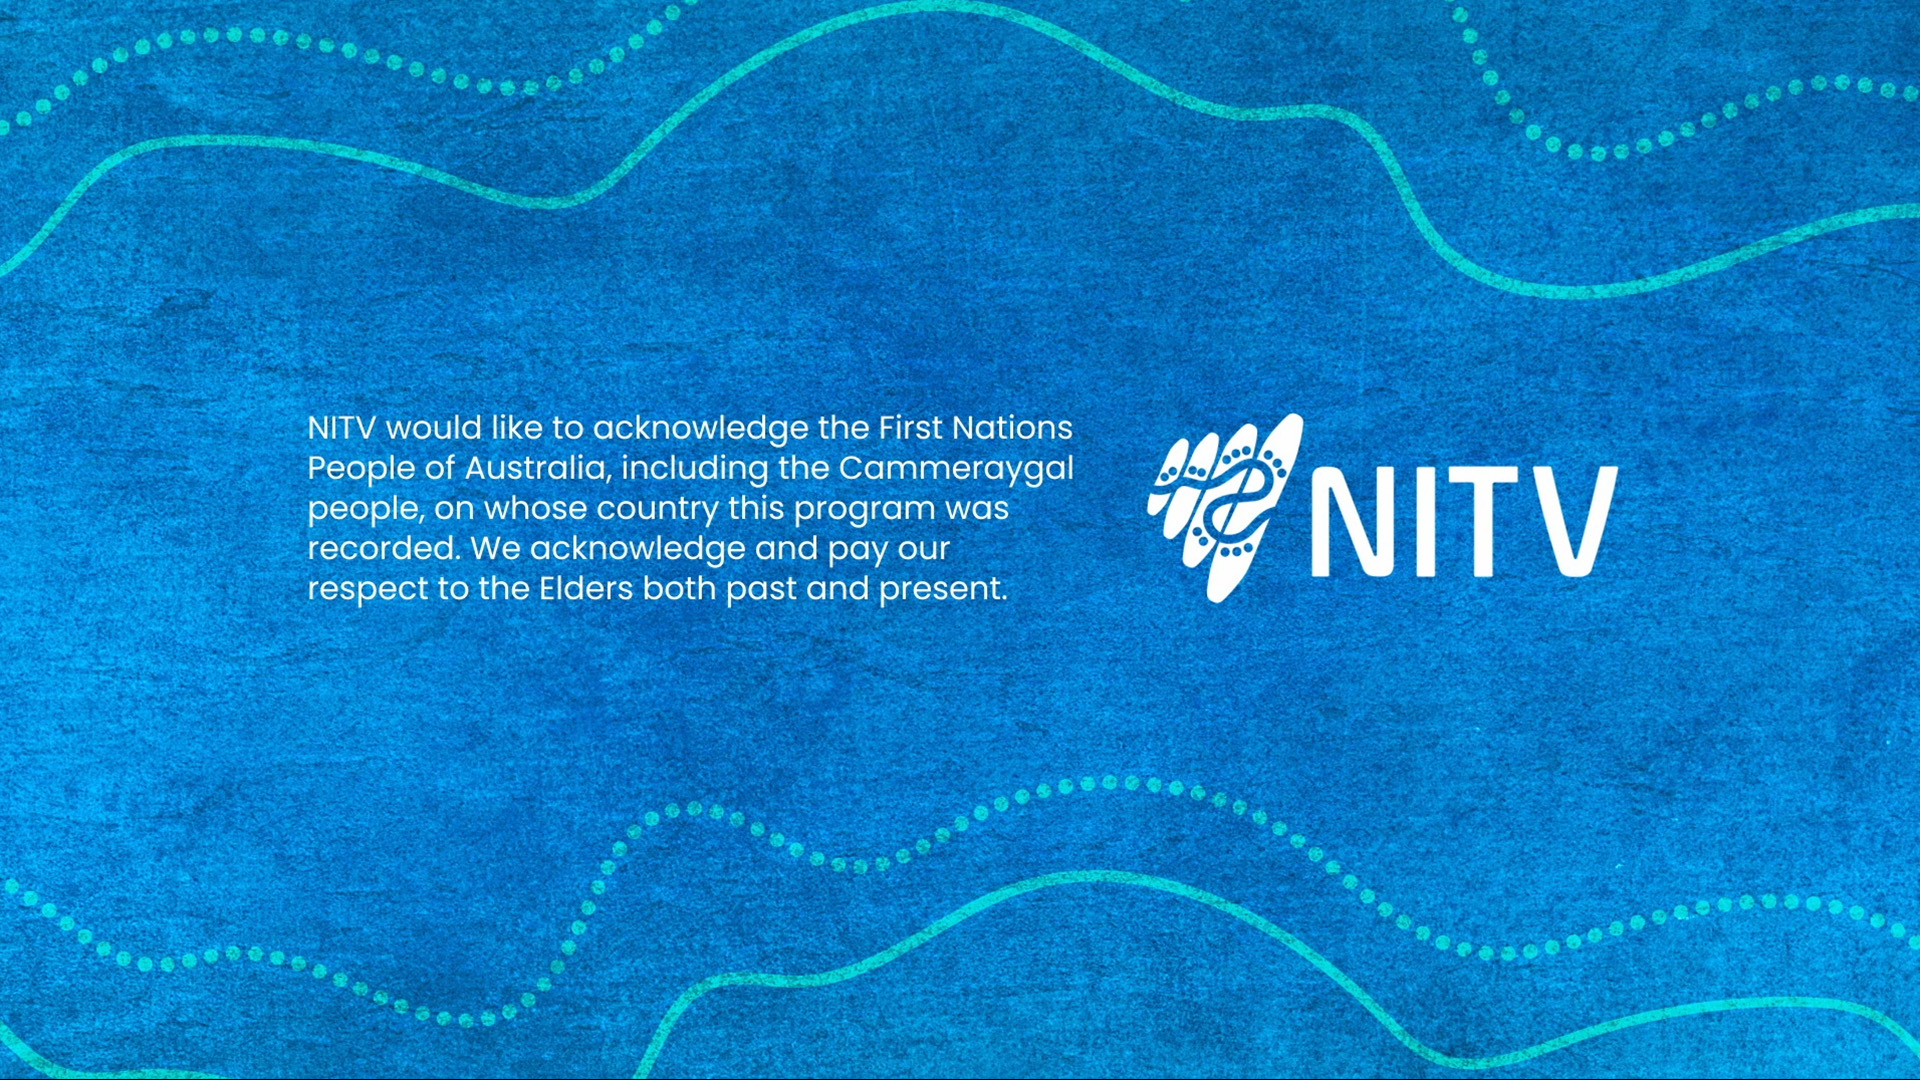 Bilma, or clapstick, logo for NITV's rebrand created by VANDAL in conjunction with First Nations creative agency Gilimbaa - TVC still featuring line and dot work animation